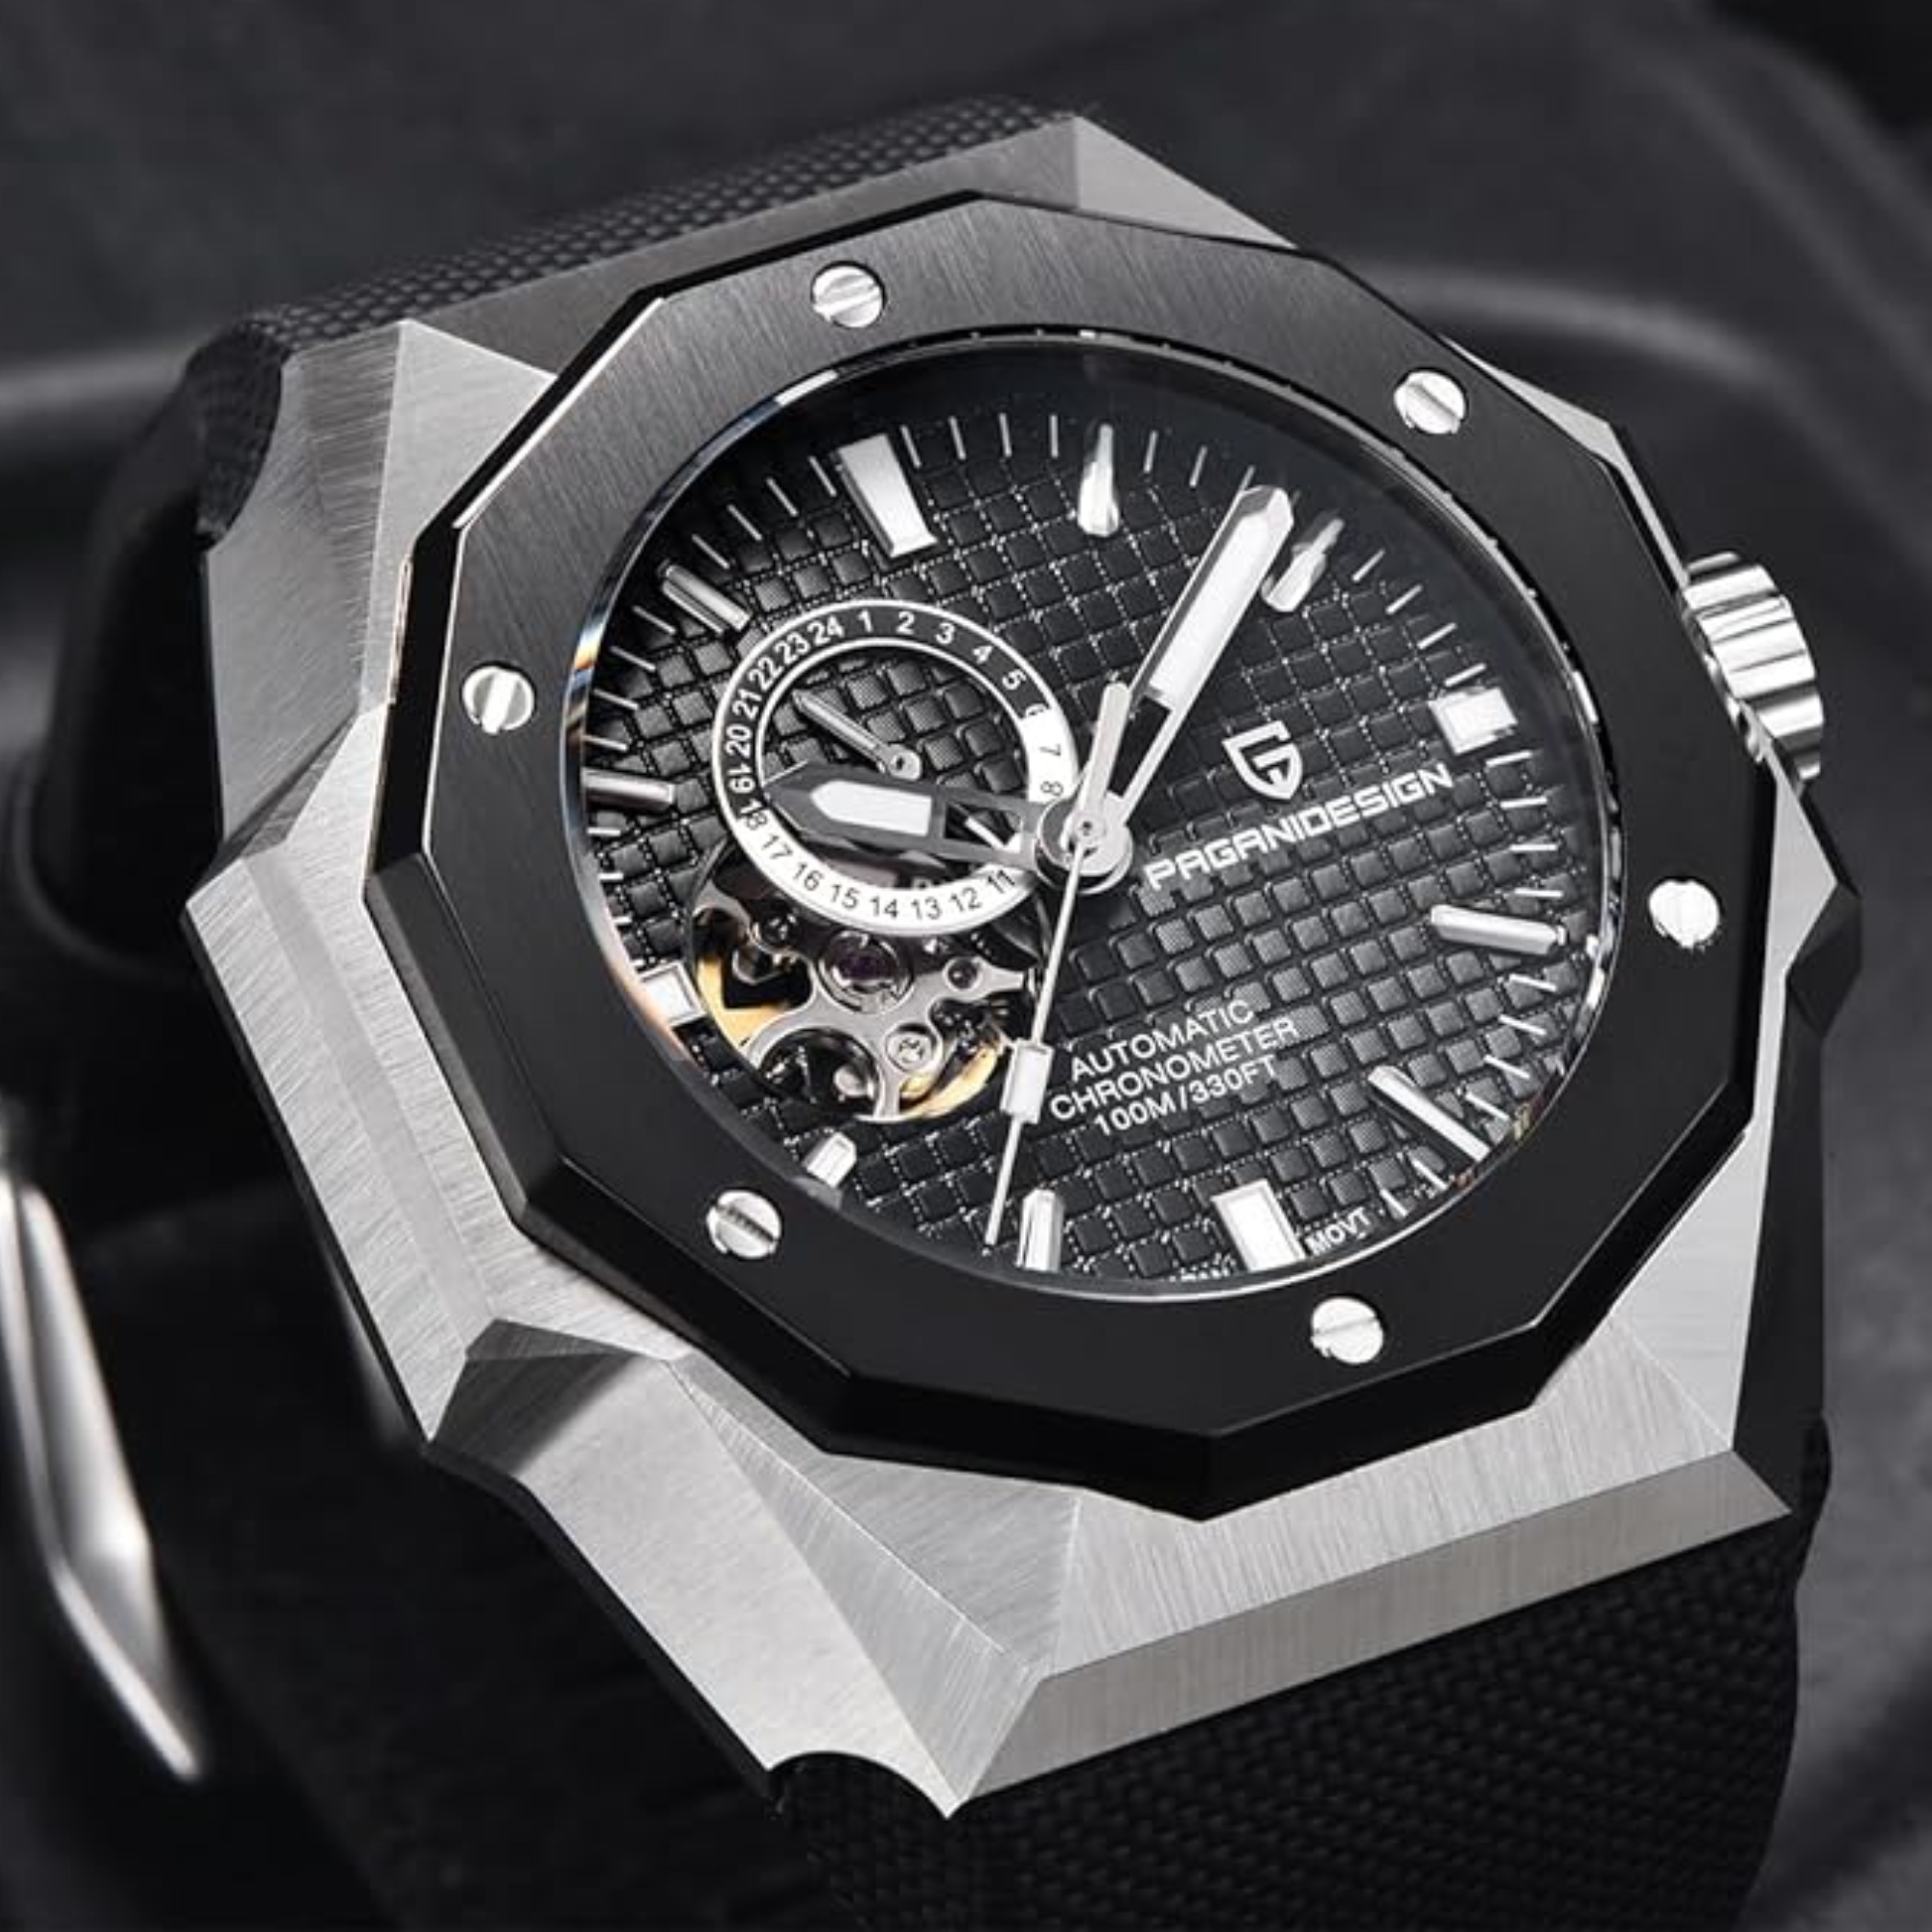 Pagani Design YS010 Men's Automatic Watch with NH39  Movement Leather Strap Waterproof Stylish and Unique Case Skeleton Face - Black